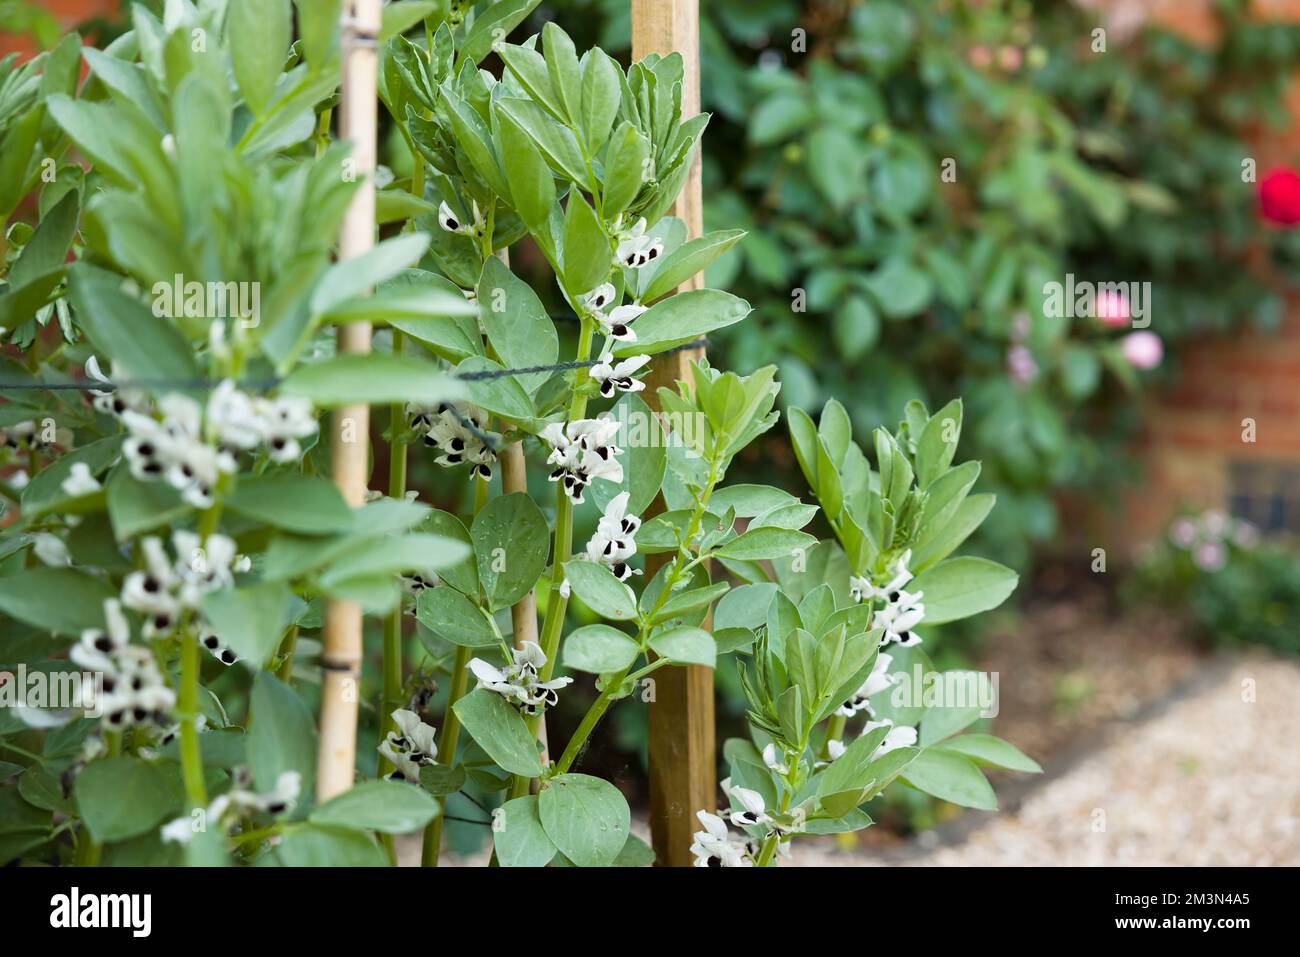 Broad beans in flower, plants growing in a vegetable plot in an English garden, UK Stock Photo